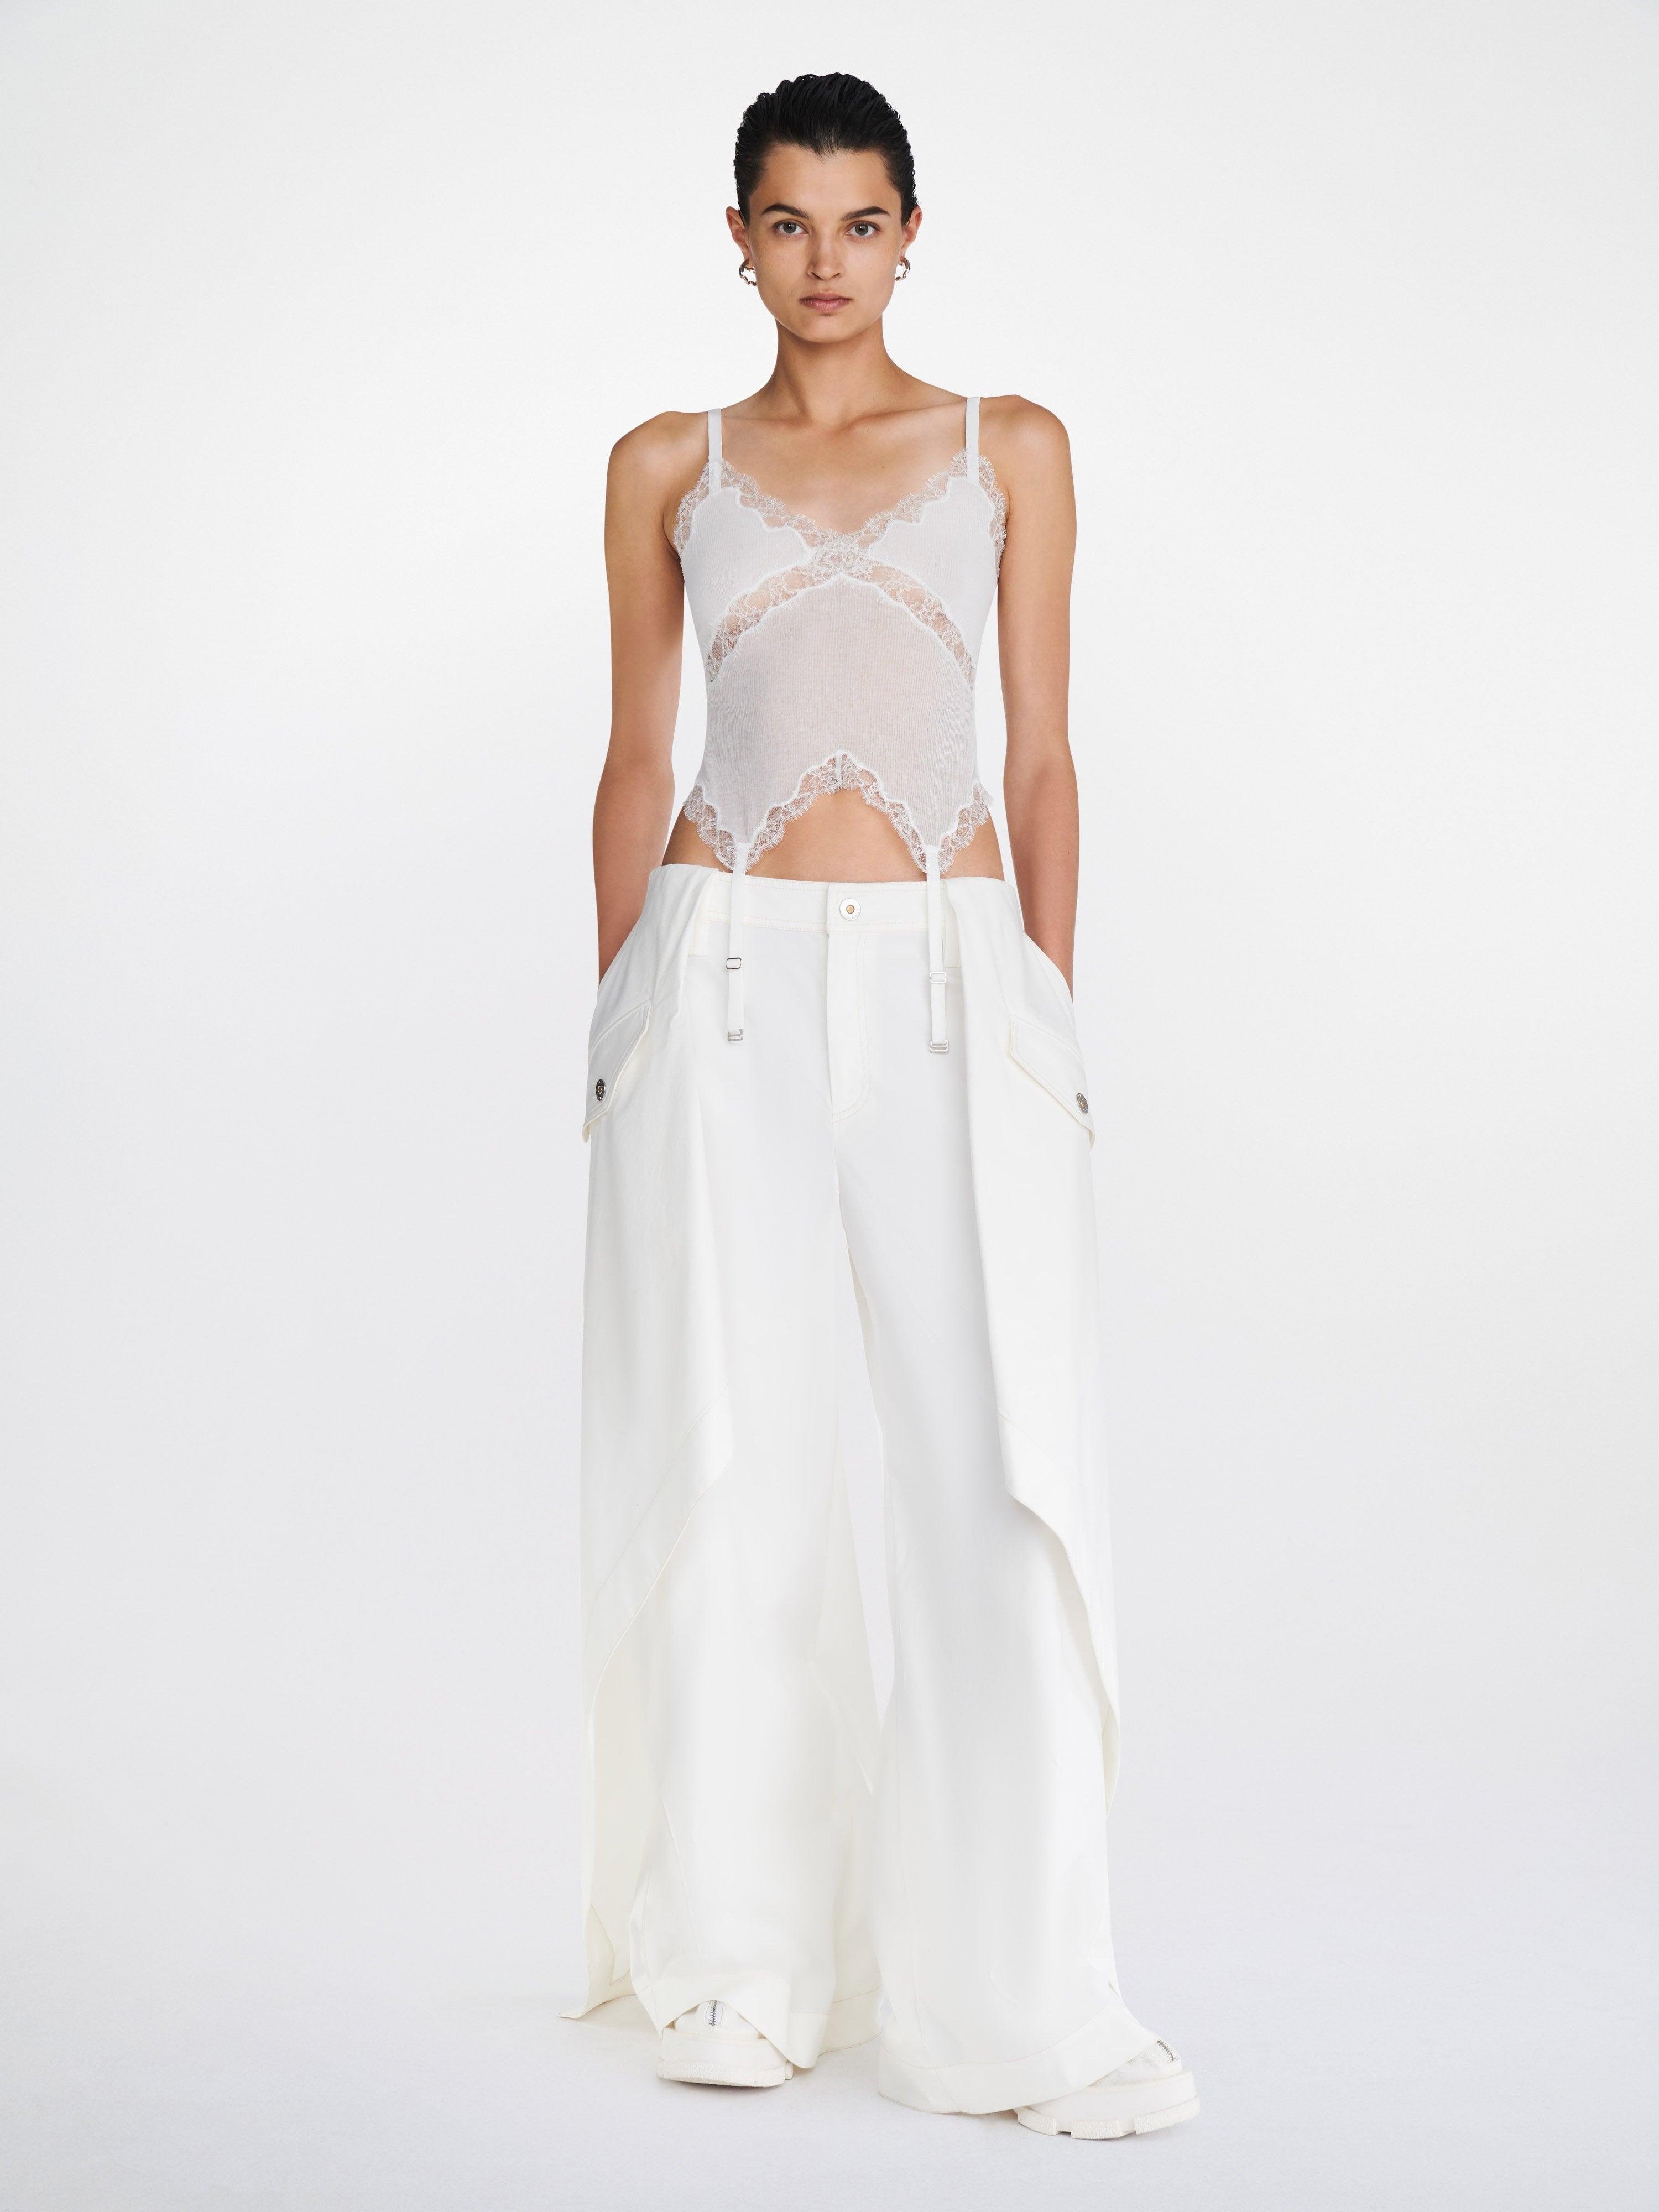 LACE RIB GARTER TANK by DION LEE